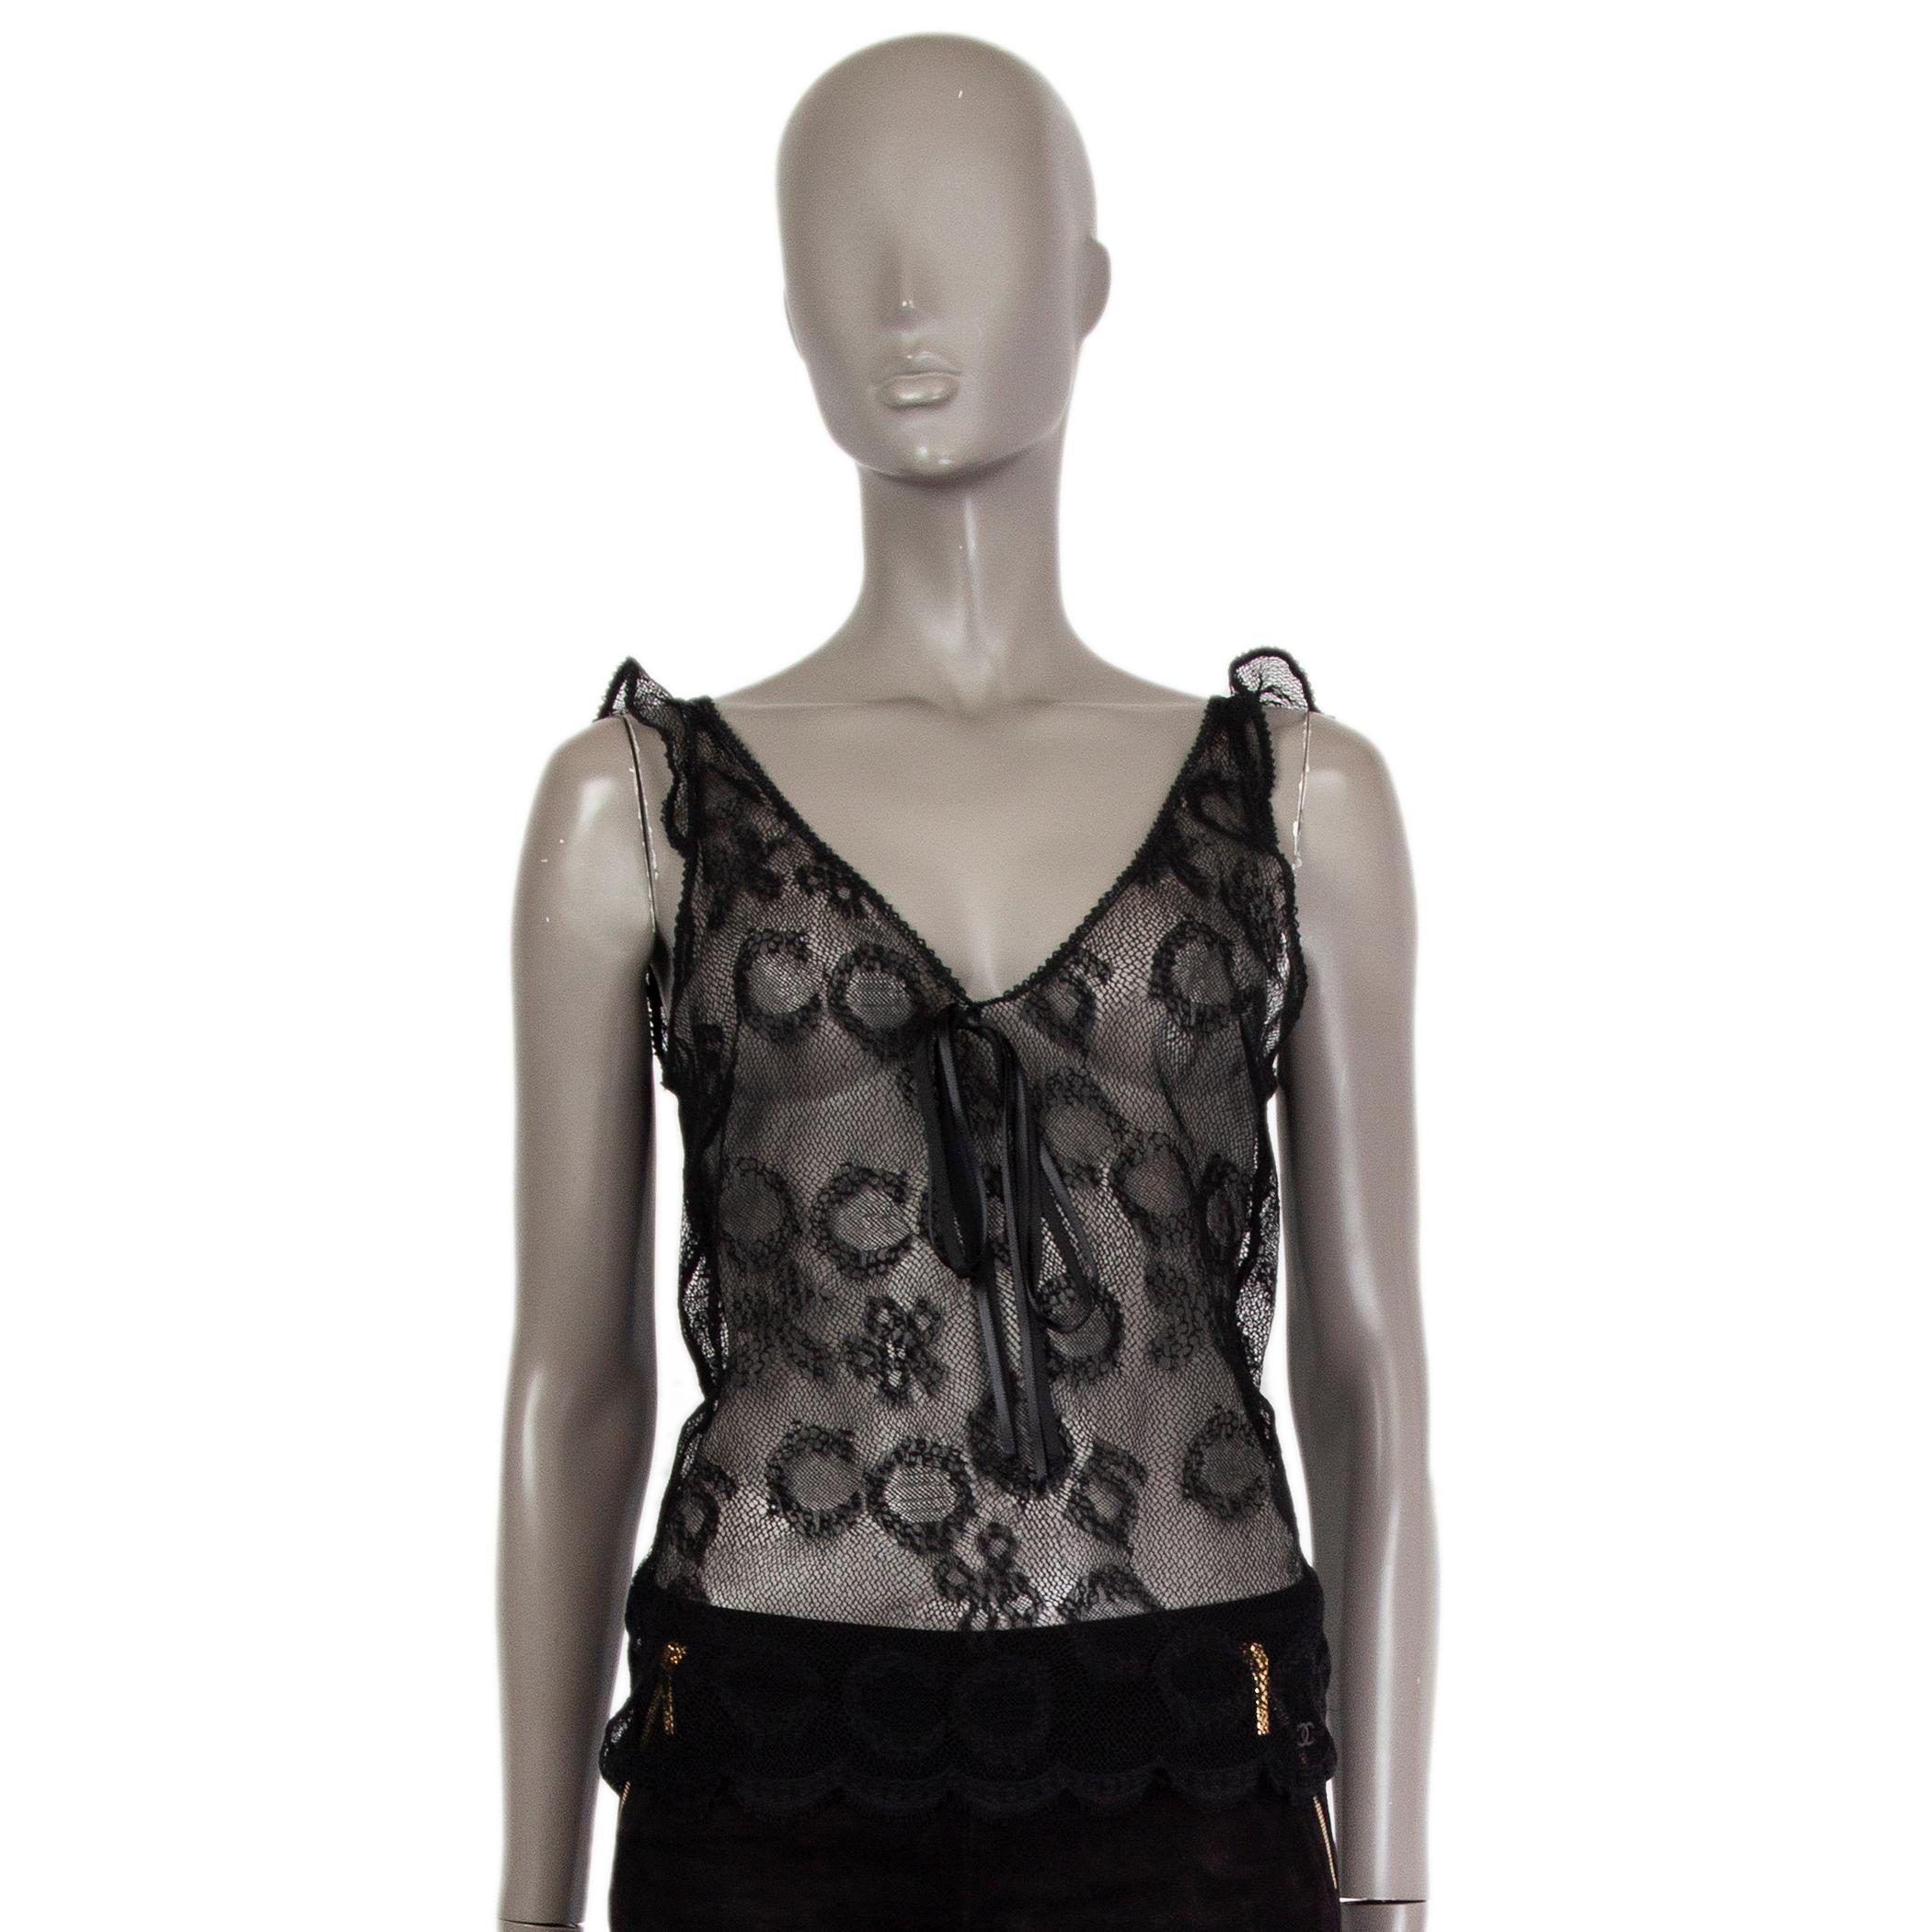 Chanel sheer lace tank-top in black viscose blend (assumed as tag is missing) with a v-neck. Unlined. Has been worn and is in excellent condition.  

Tag Size Missing Size
Size M
Shoulder Width 37cm (14.4in)
Bust 82cm (32in) to 84cm (32.8in)
Waist